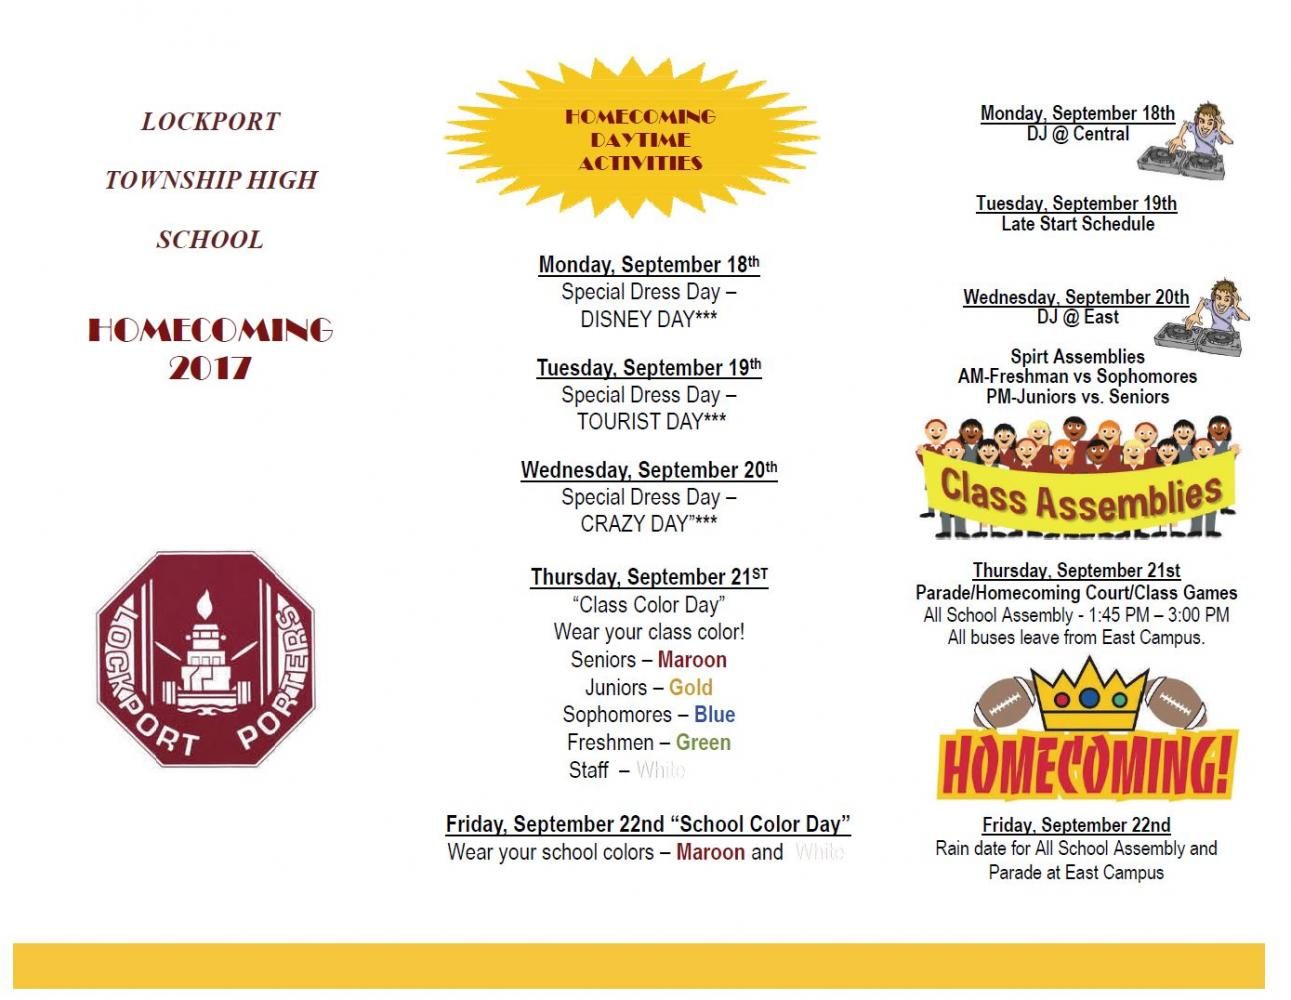 LTHS 2017 Homecoming brings forth series of events next week